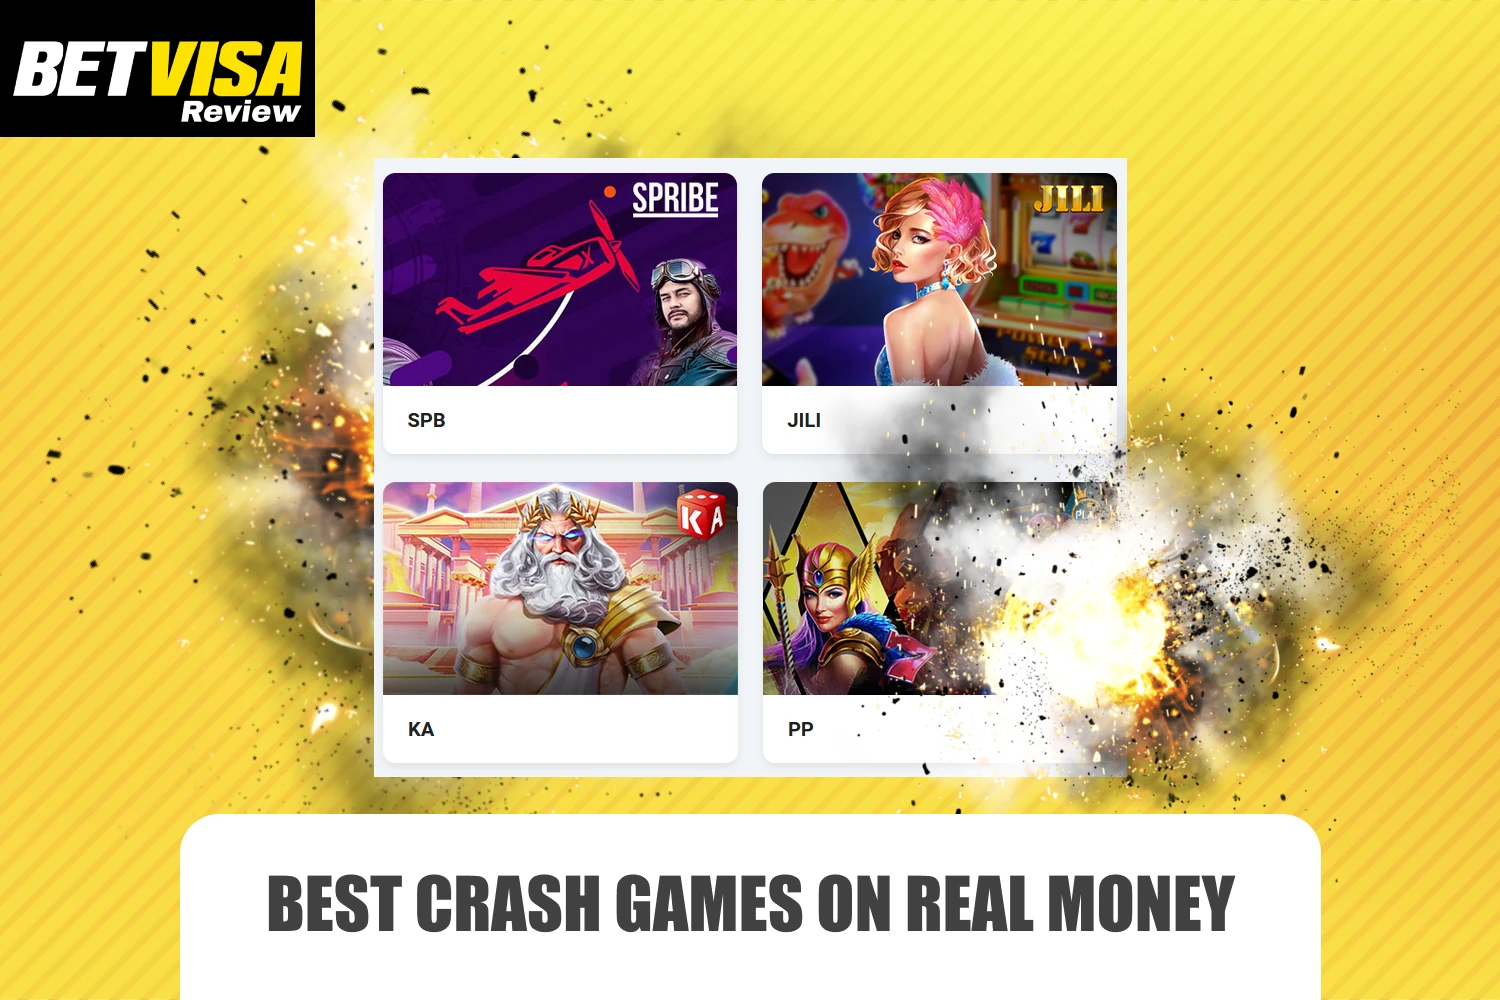 Players from India can dive into the world of crash games and win real money on Betvisa's website